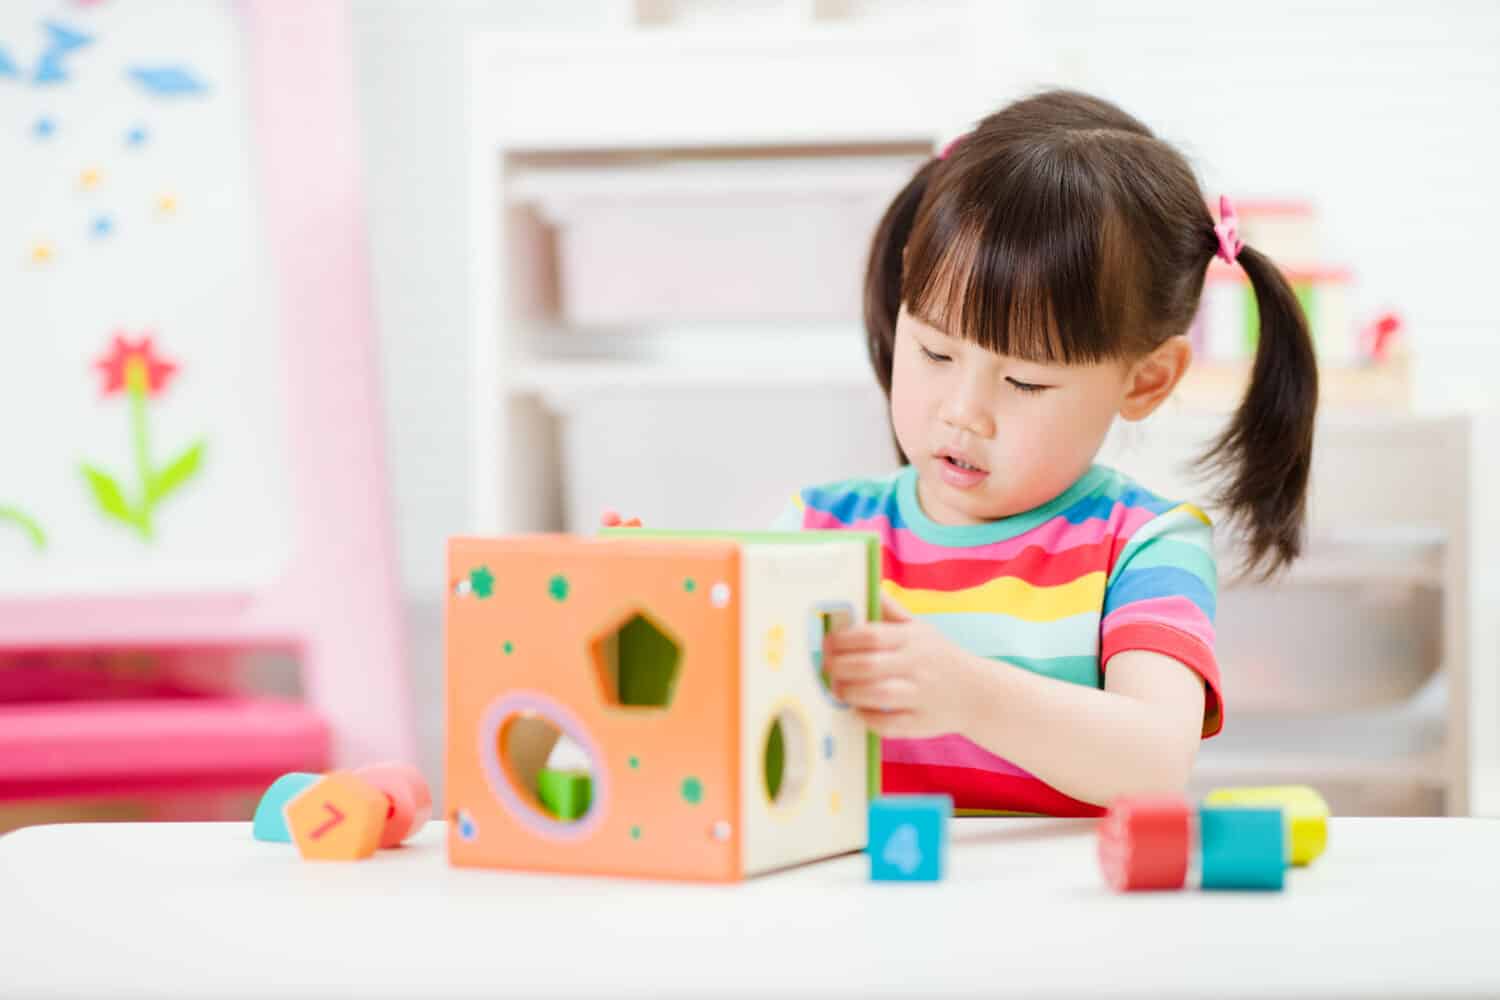 young girl playing number shape blocks for homeschooling